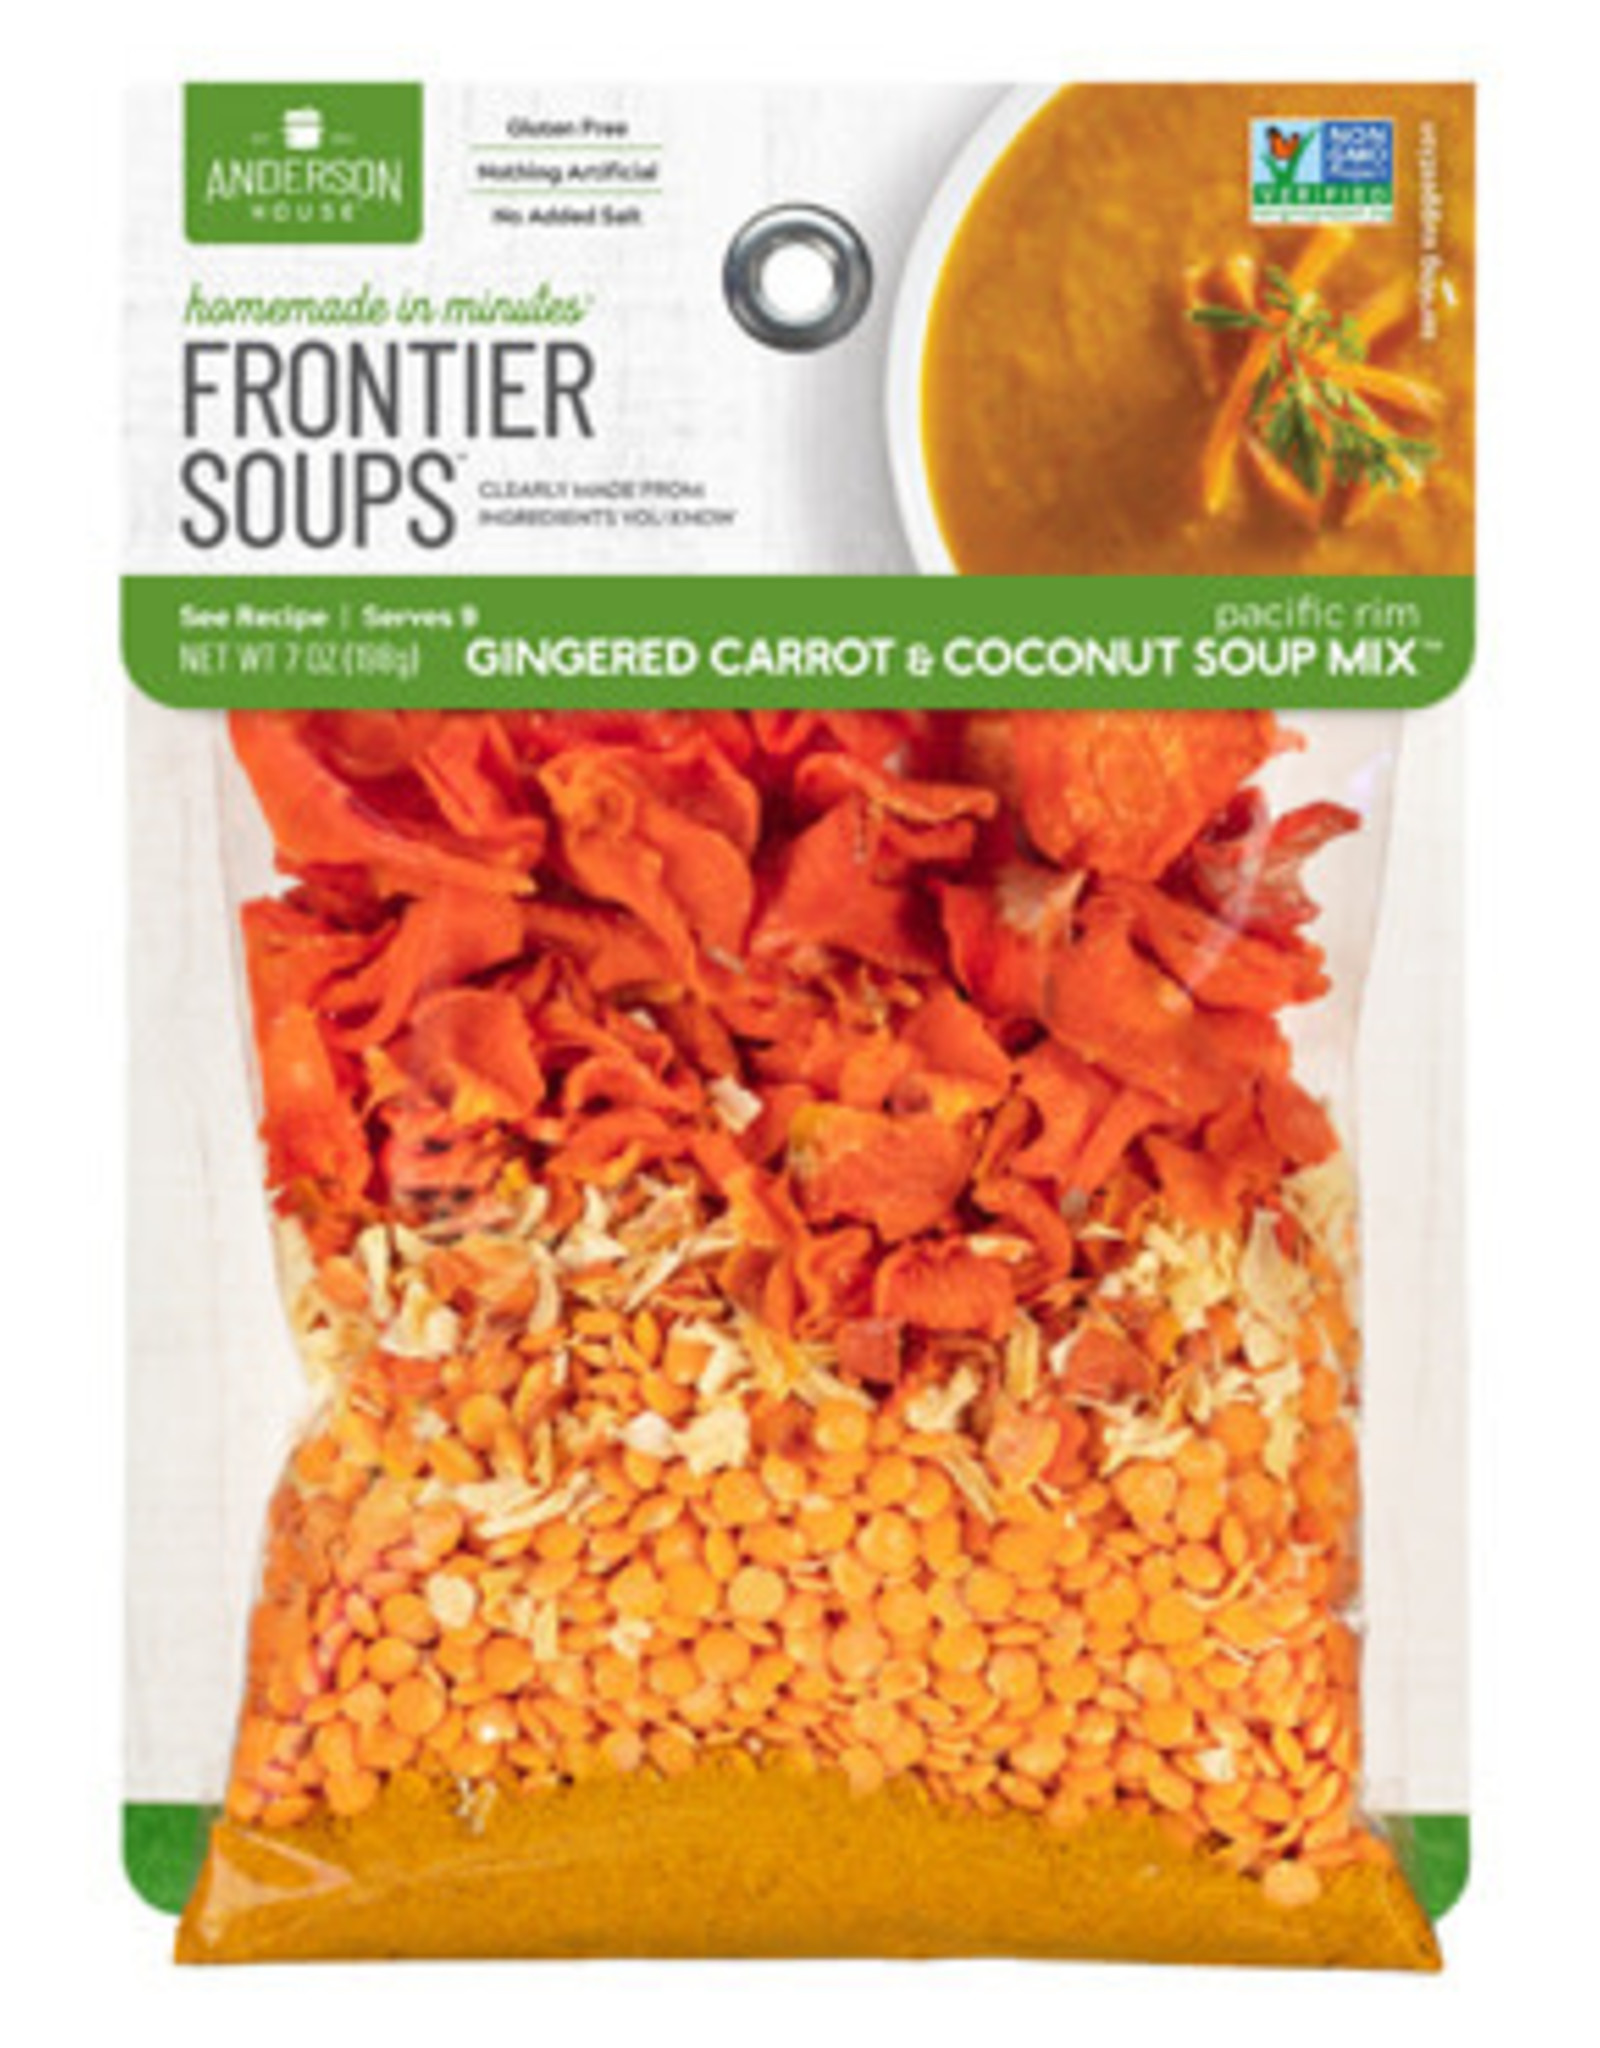 Frontier Soups PACIFIC RIM GINGERED CARROT & COCONUT SOUP MIX